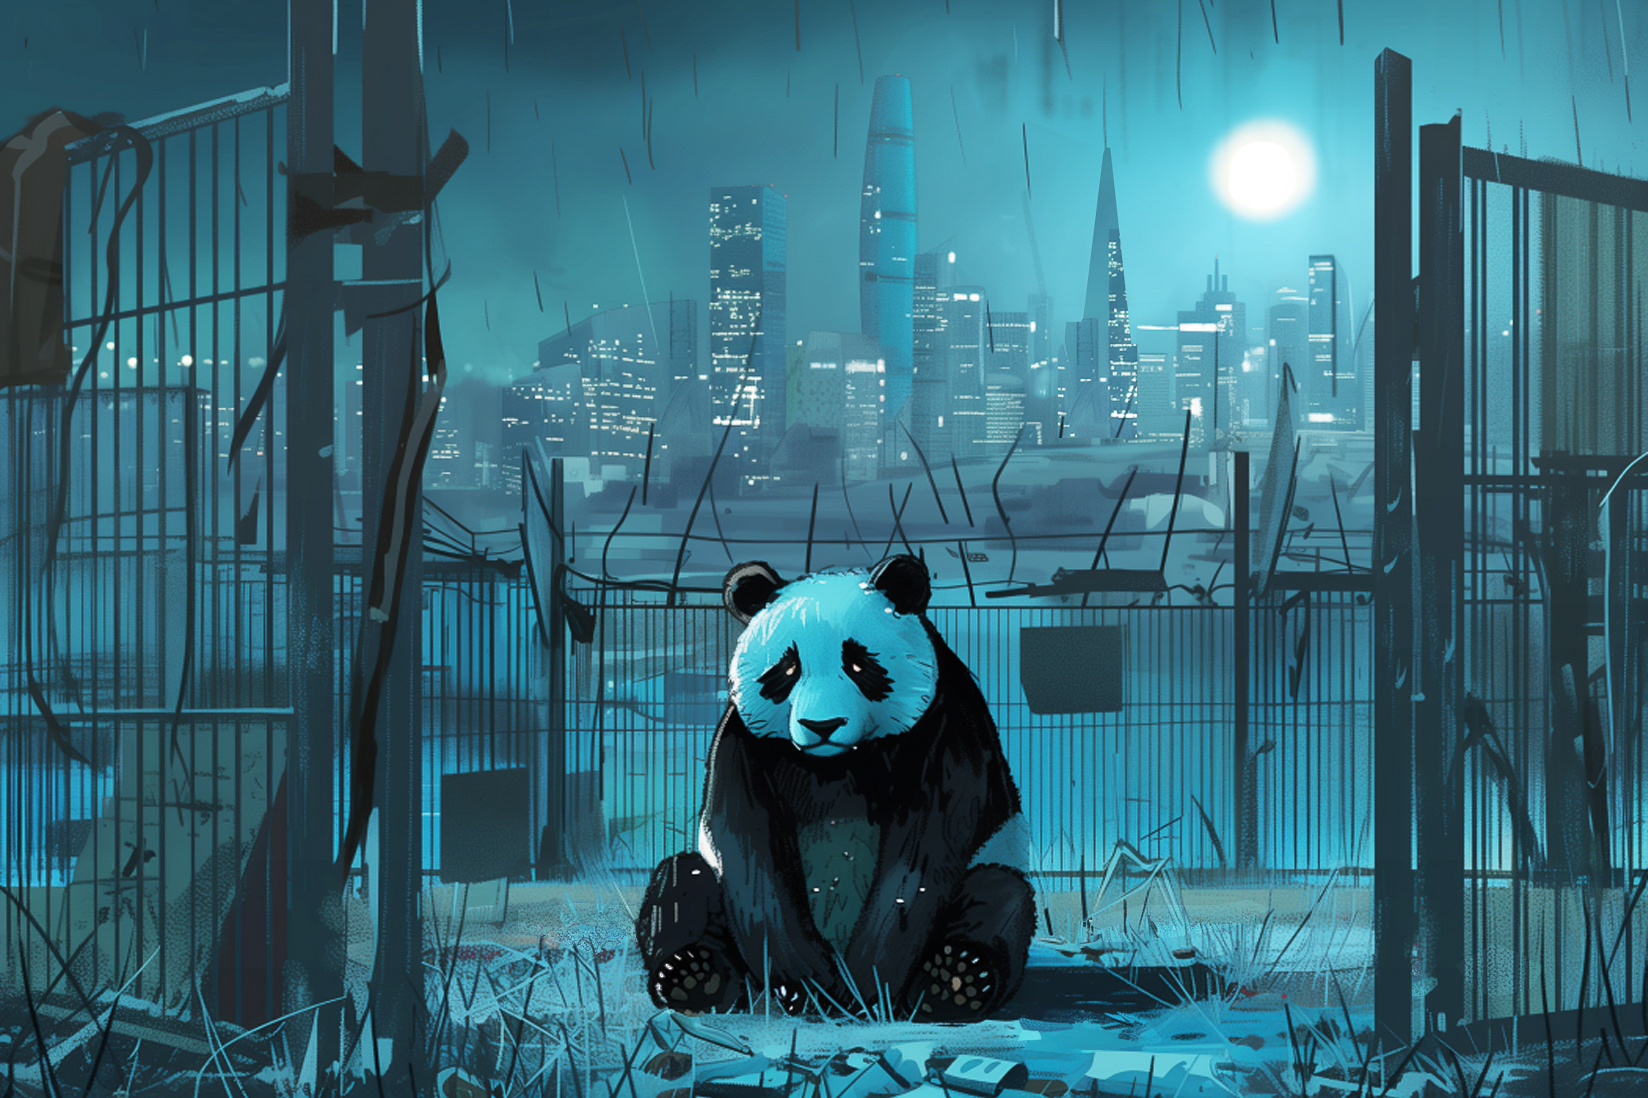 A forlorn panda sits in a rain-soaked, derelict lot overlooking a brightly lit cityscape at night.